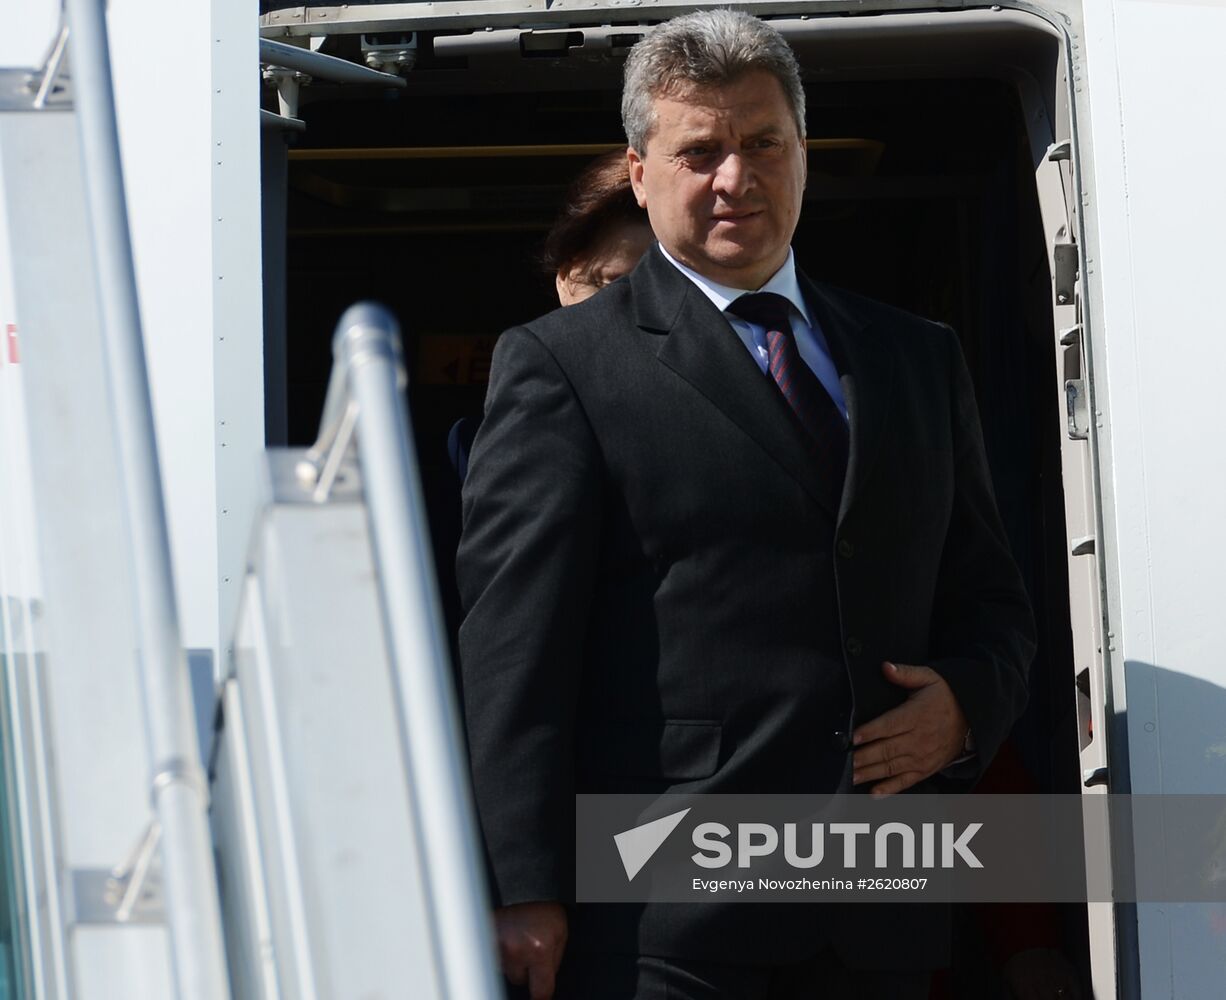 President of Macedonia Gorge Ivanov arrives in Moscow